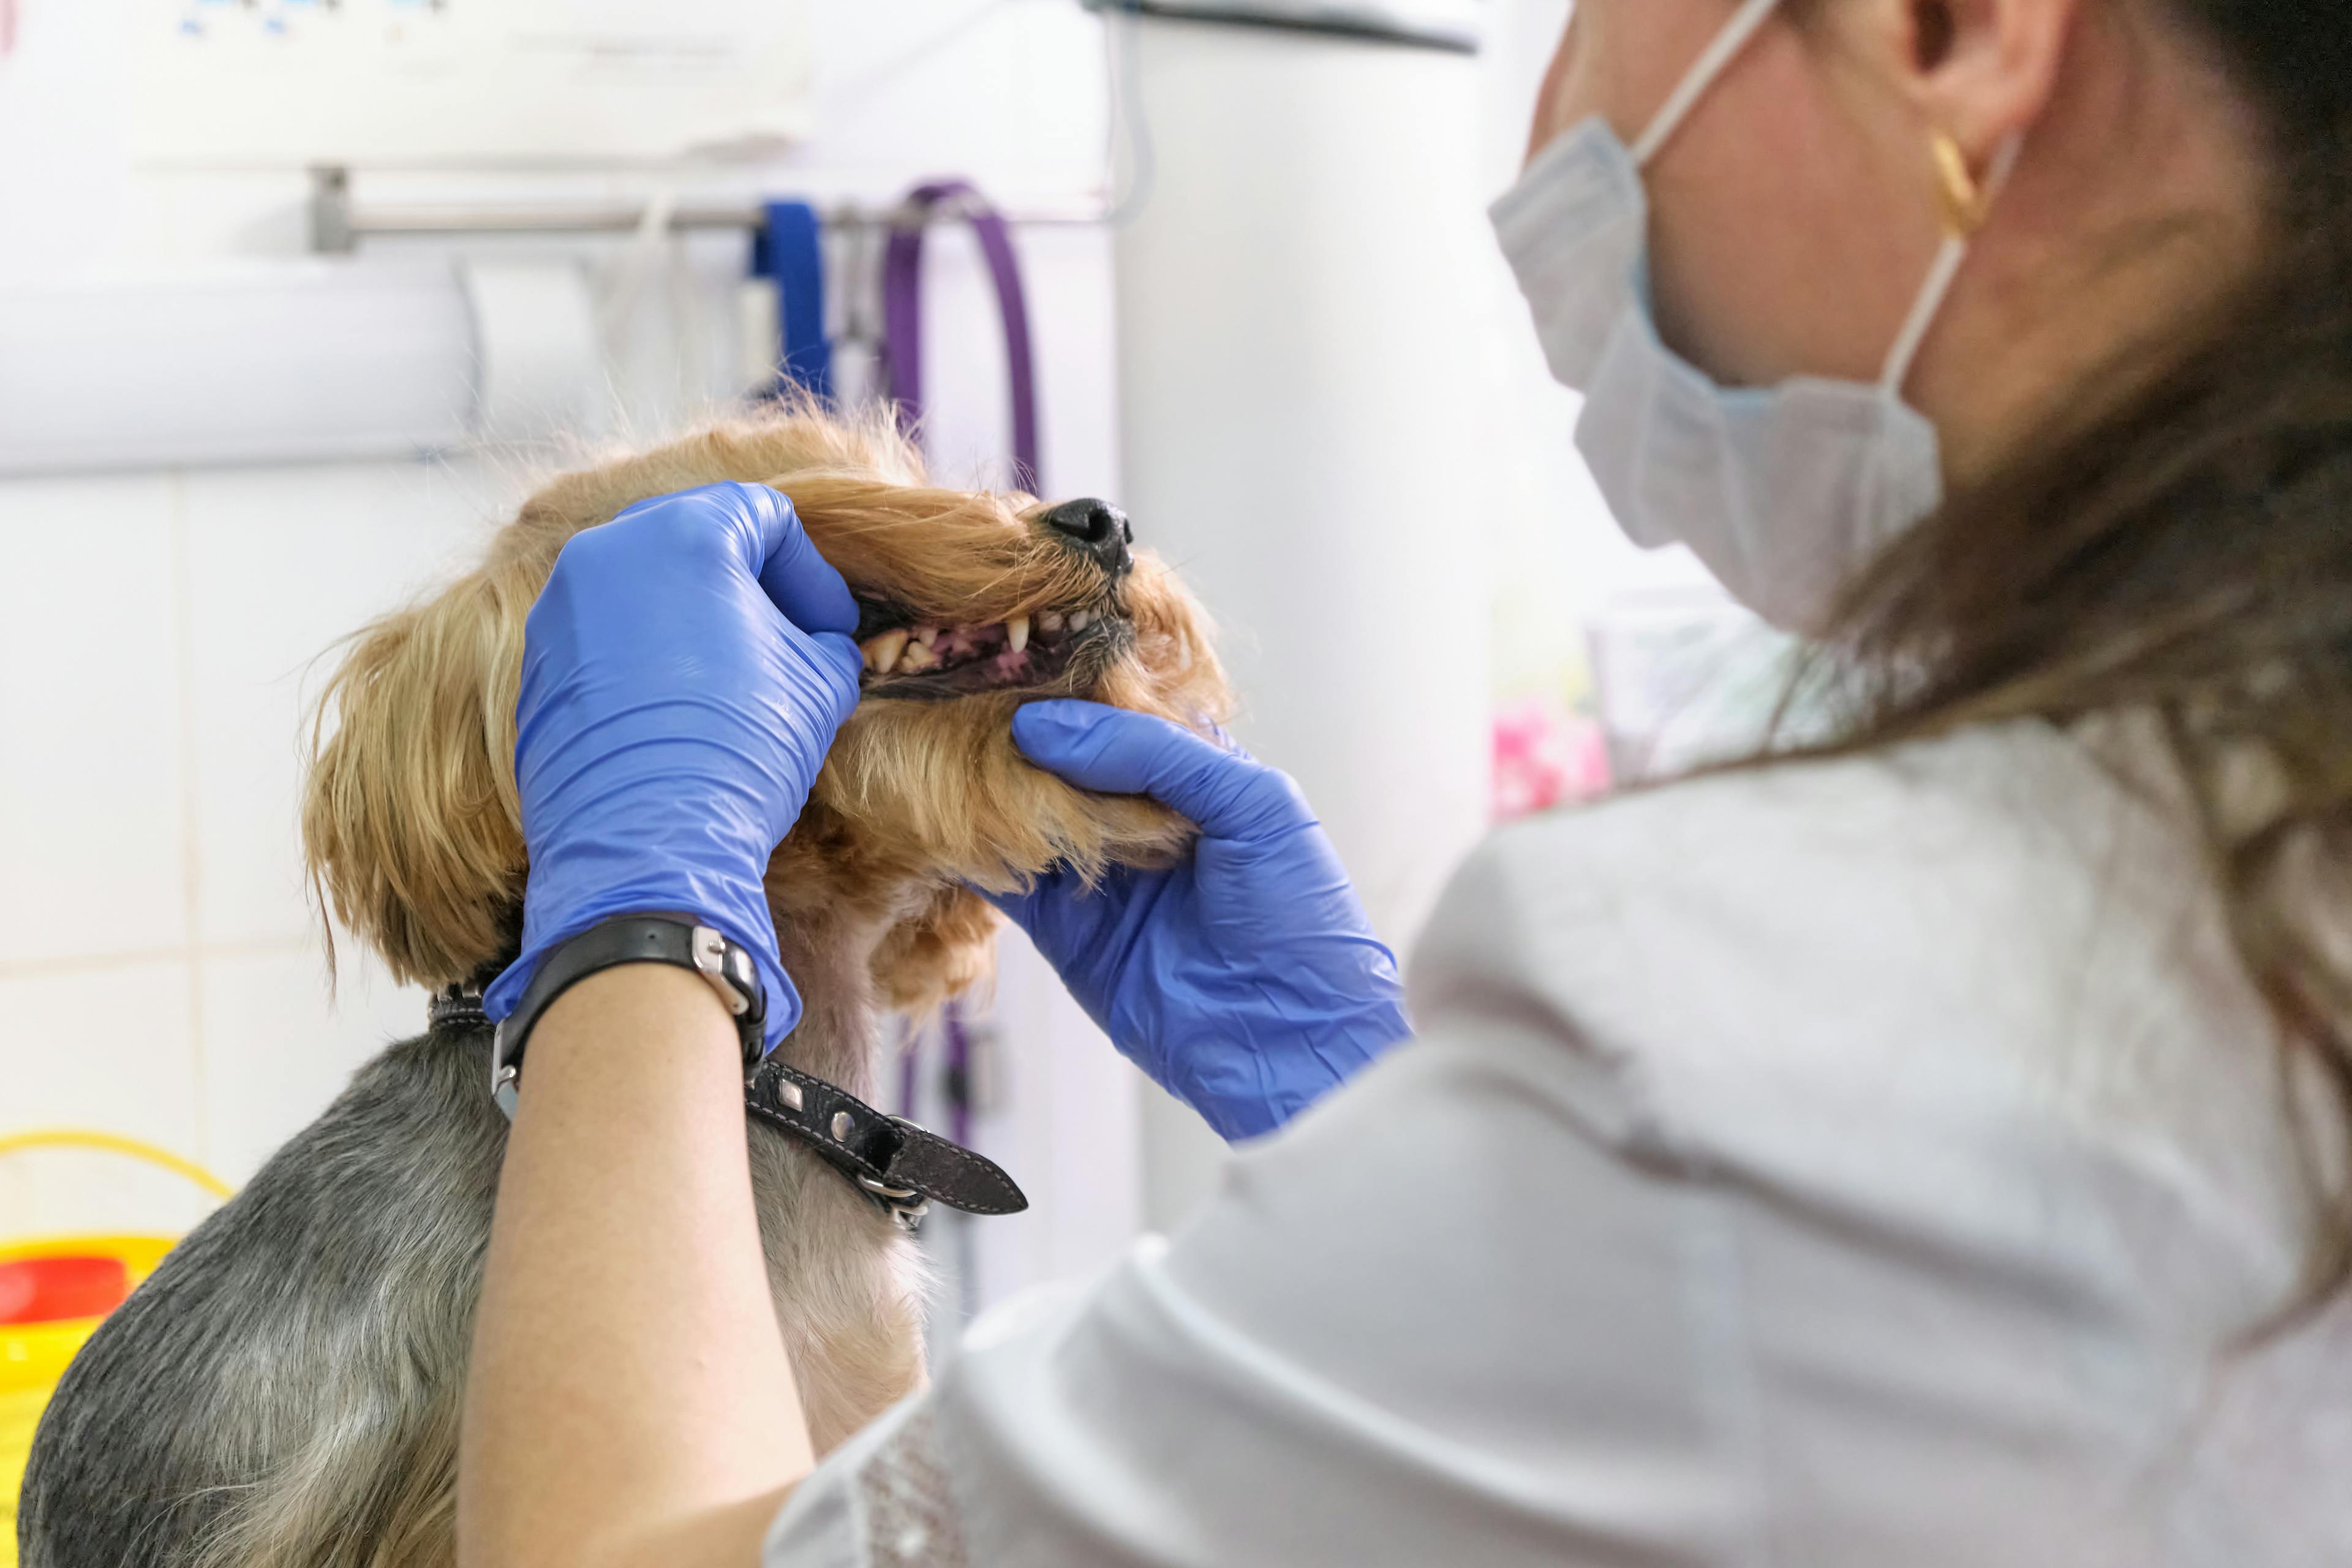 90% of dogs develop periodontal (gum) disease by age 2. Learn how you can prevent your pet from experiencing this painful condition.